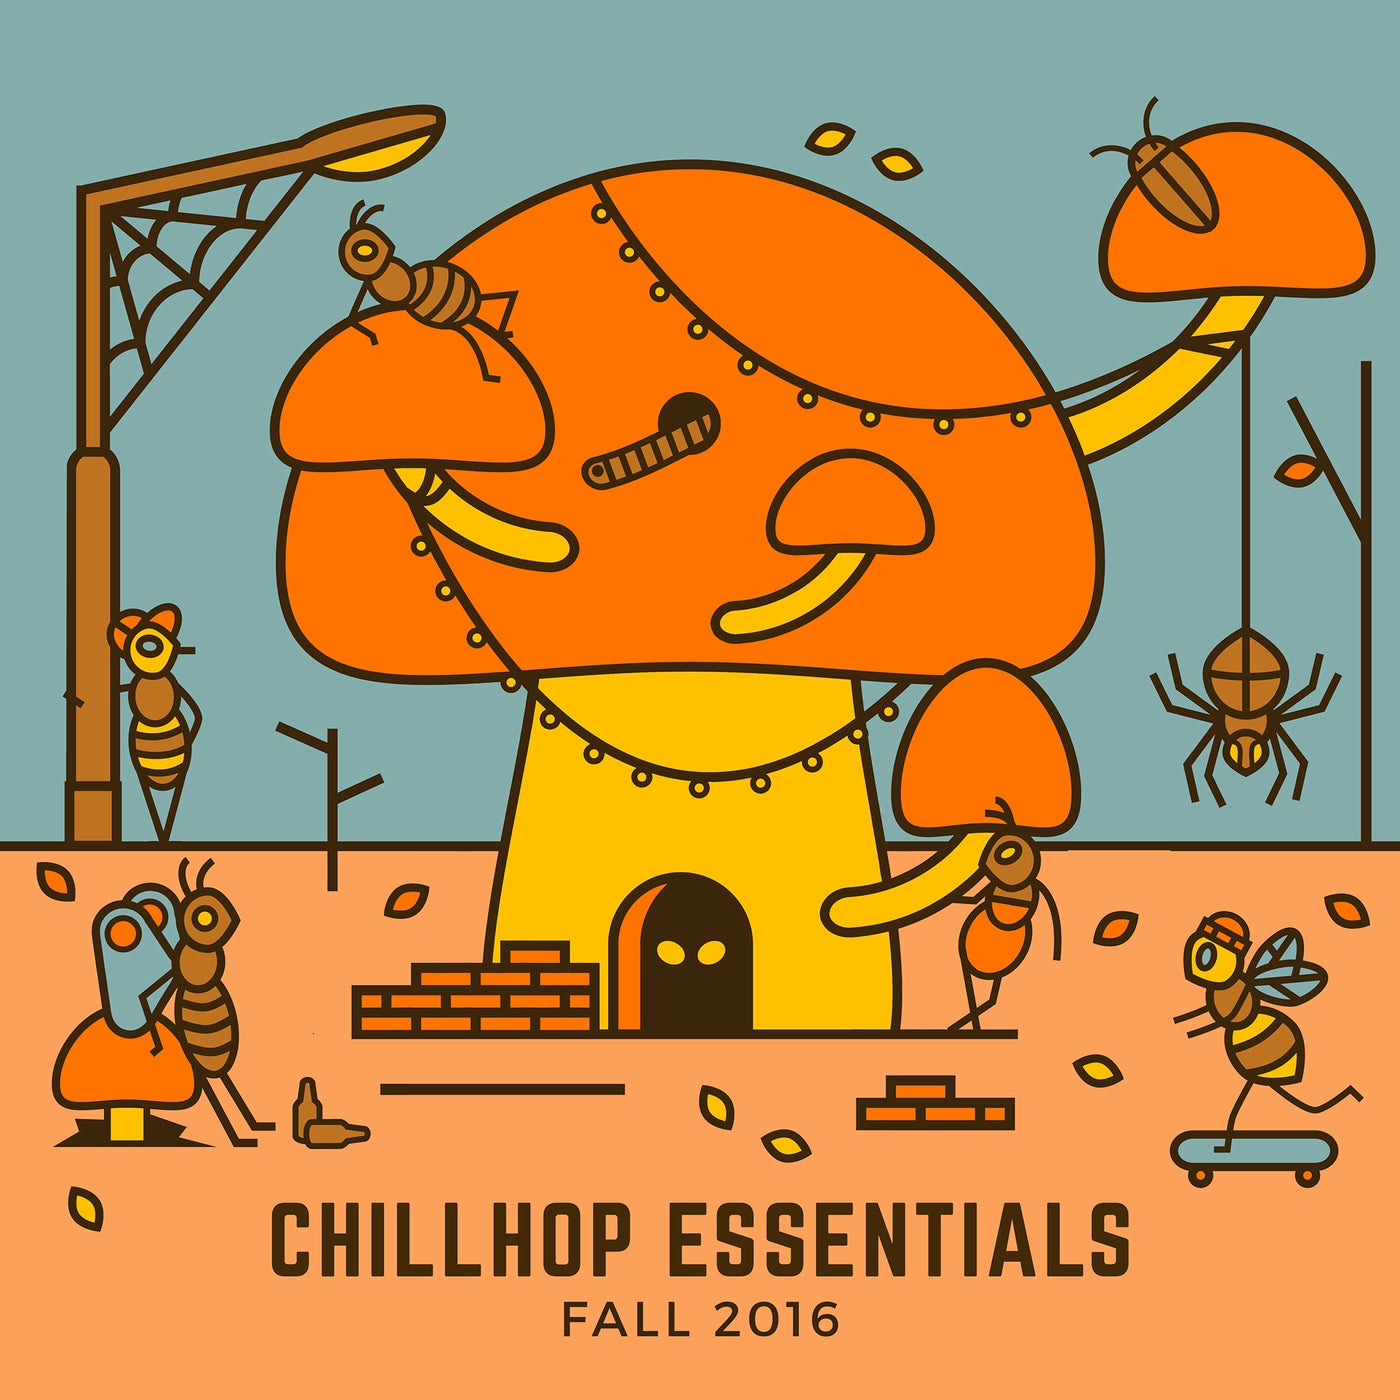 Chillhop Essentials Fall 2020. Floppy Circus. Floppy Circus - Misty. Something Fall Apart.